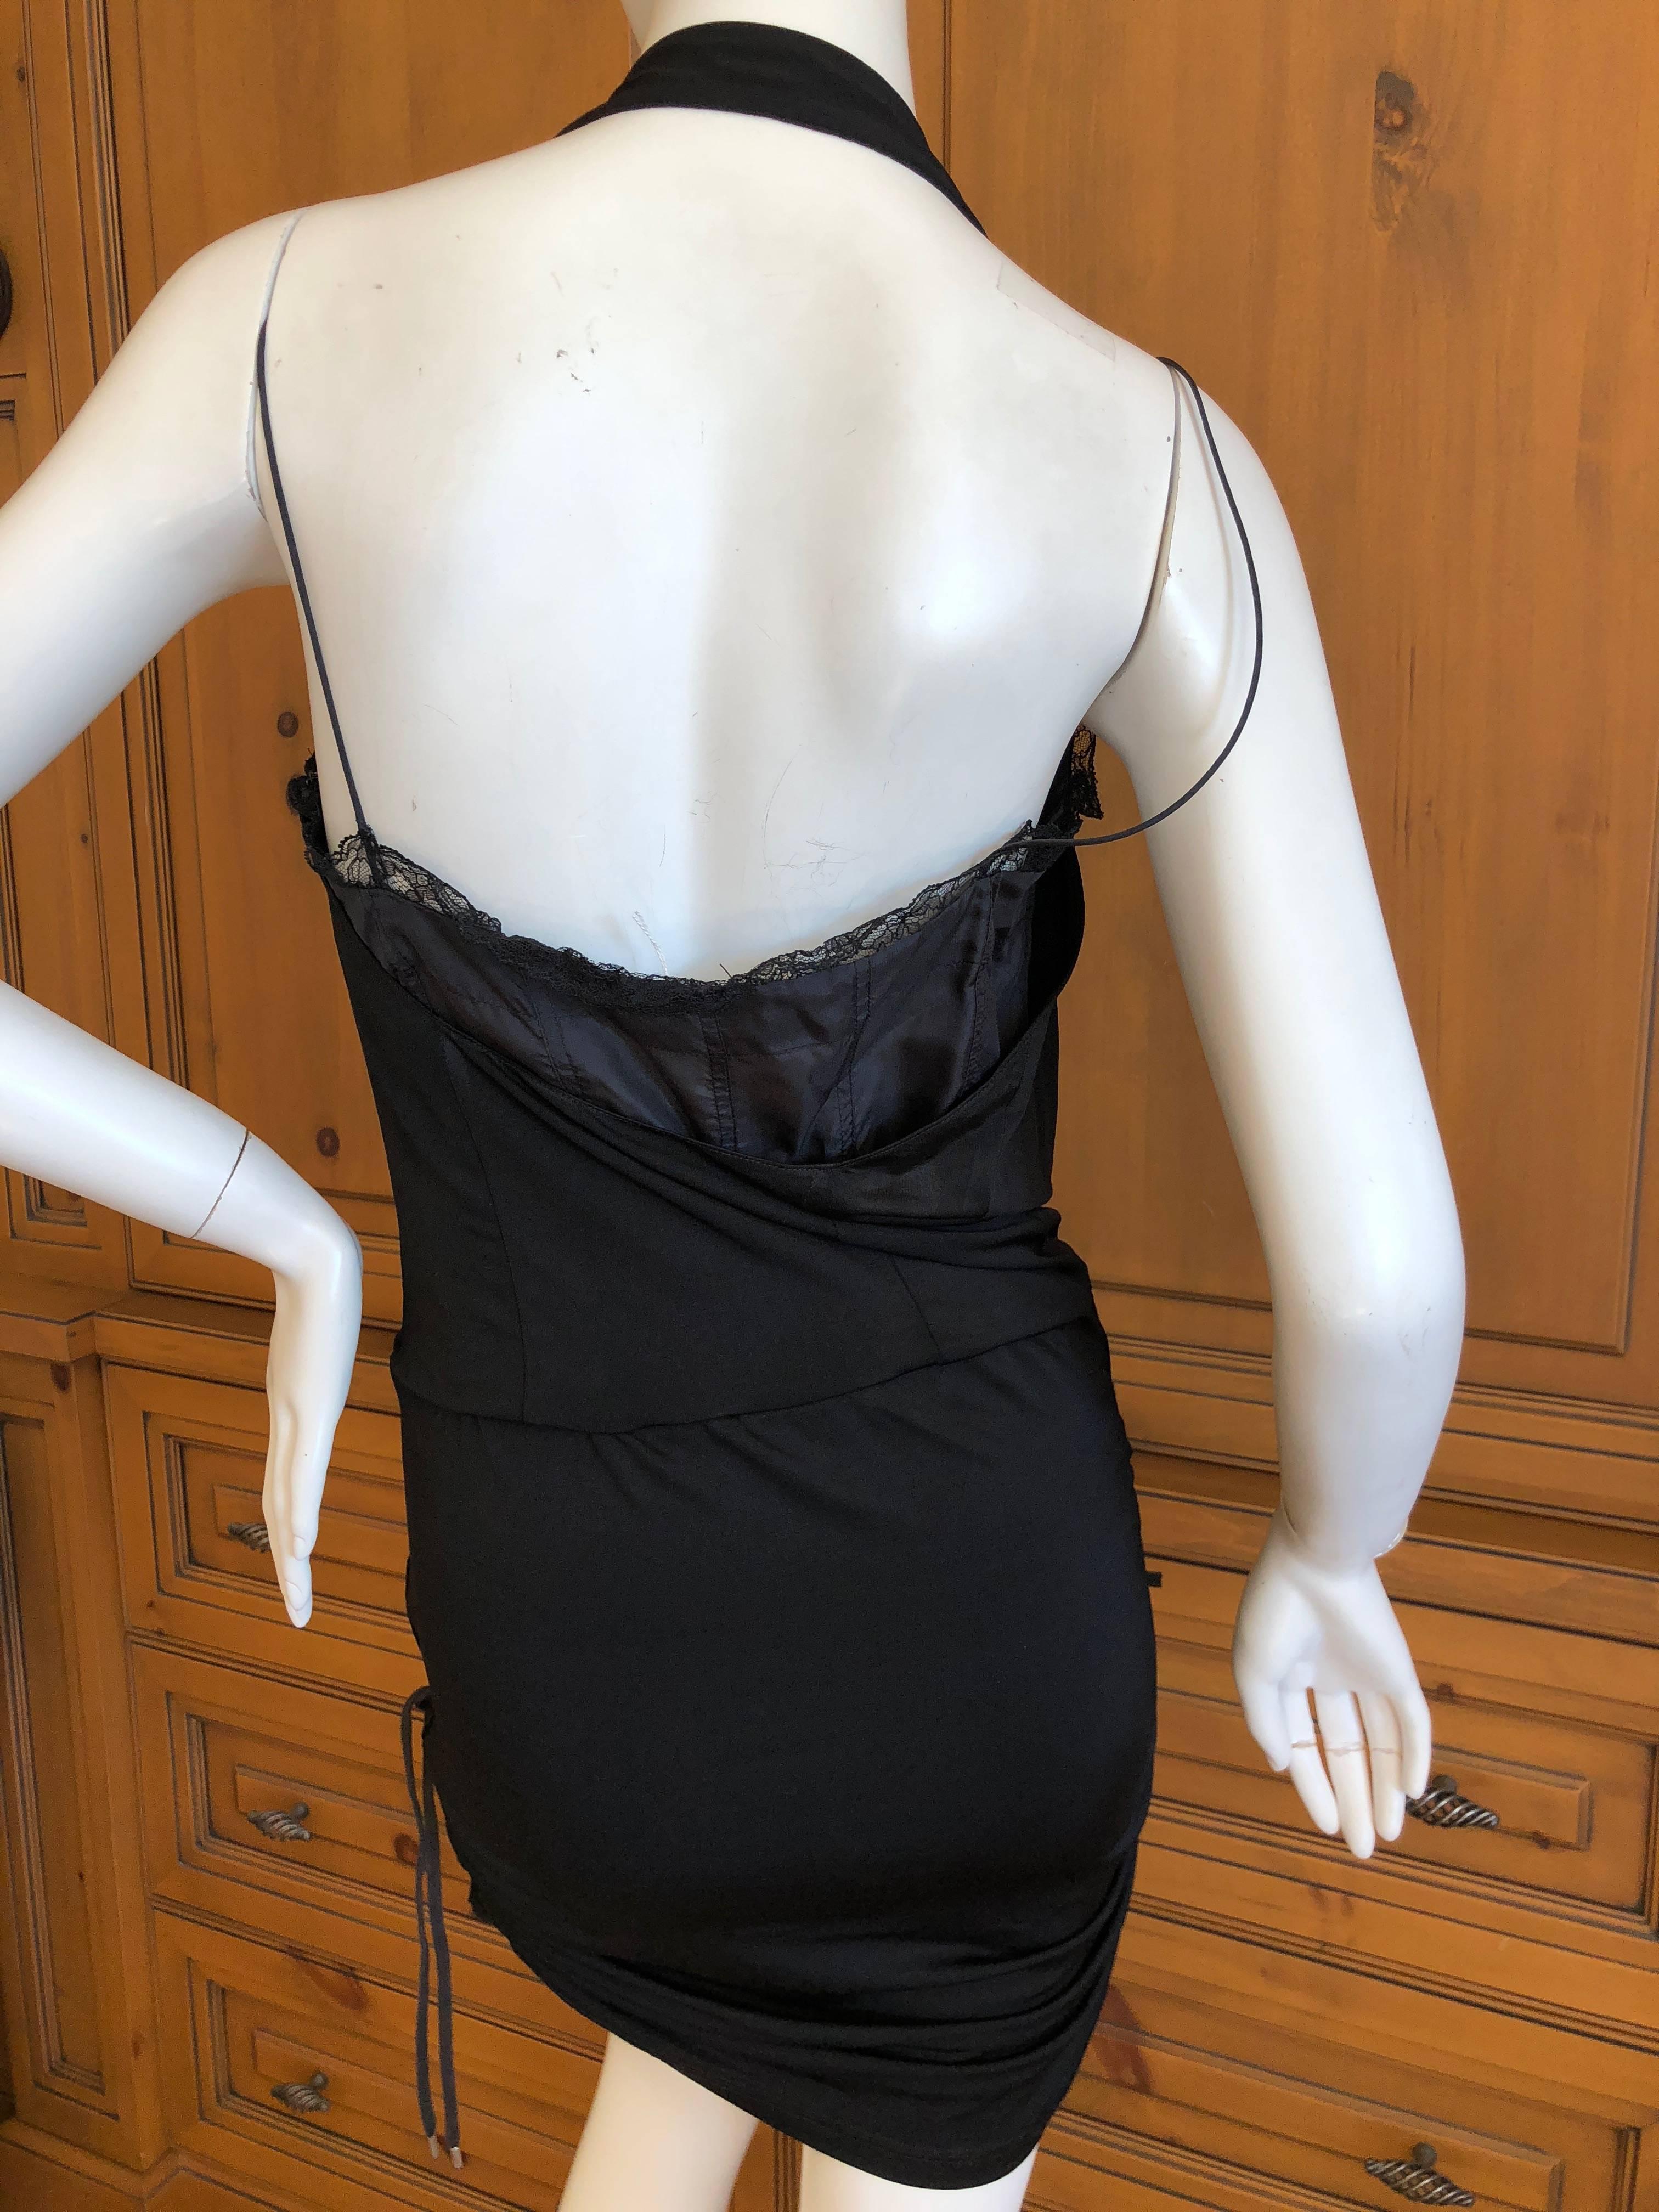 Christian Dior by John Galliano Lingerie Inspired Corset Laced Cocktail Dress 3